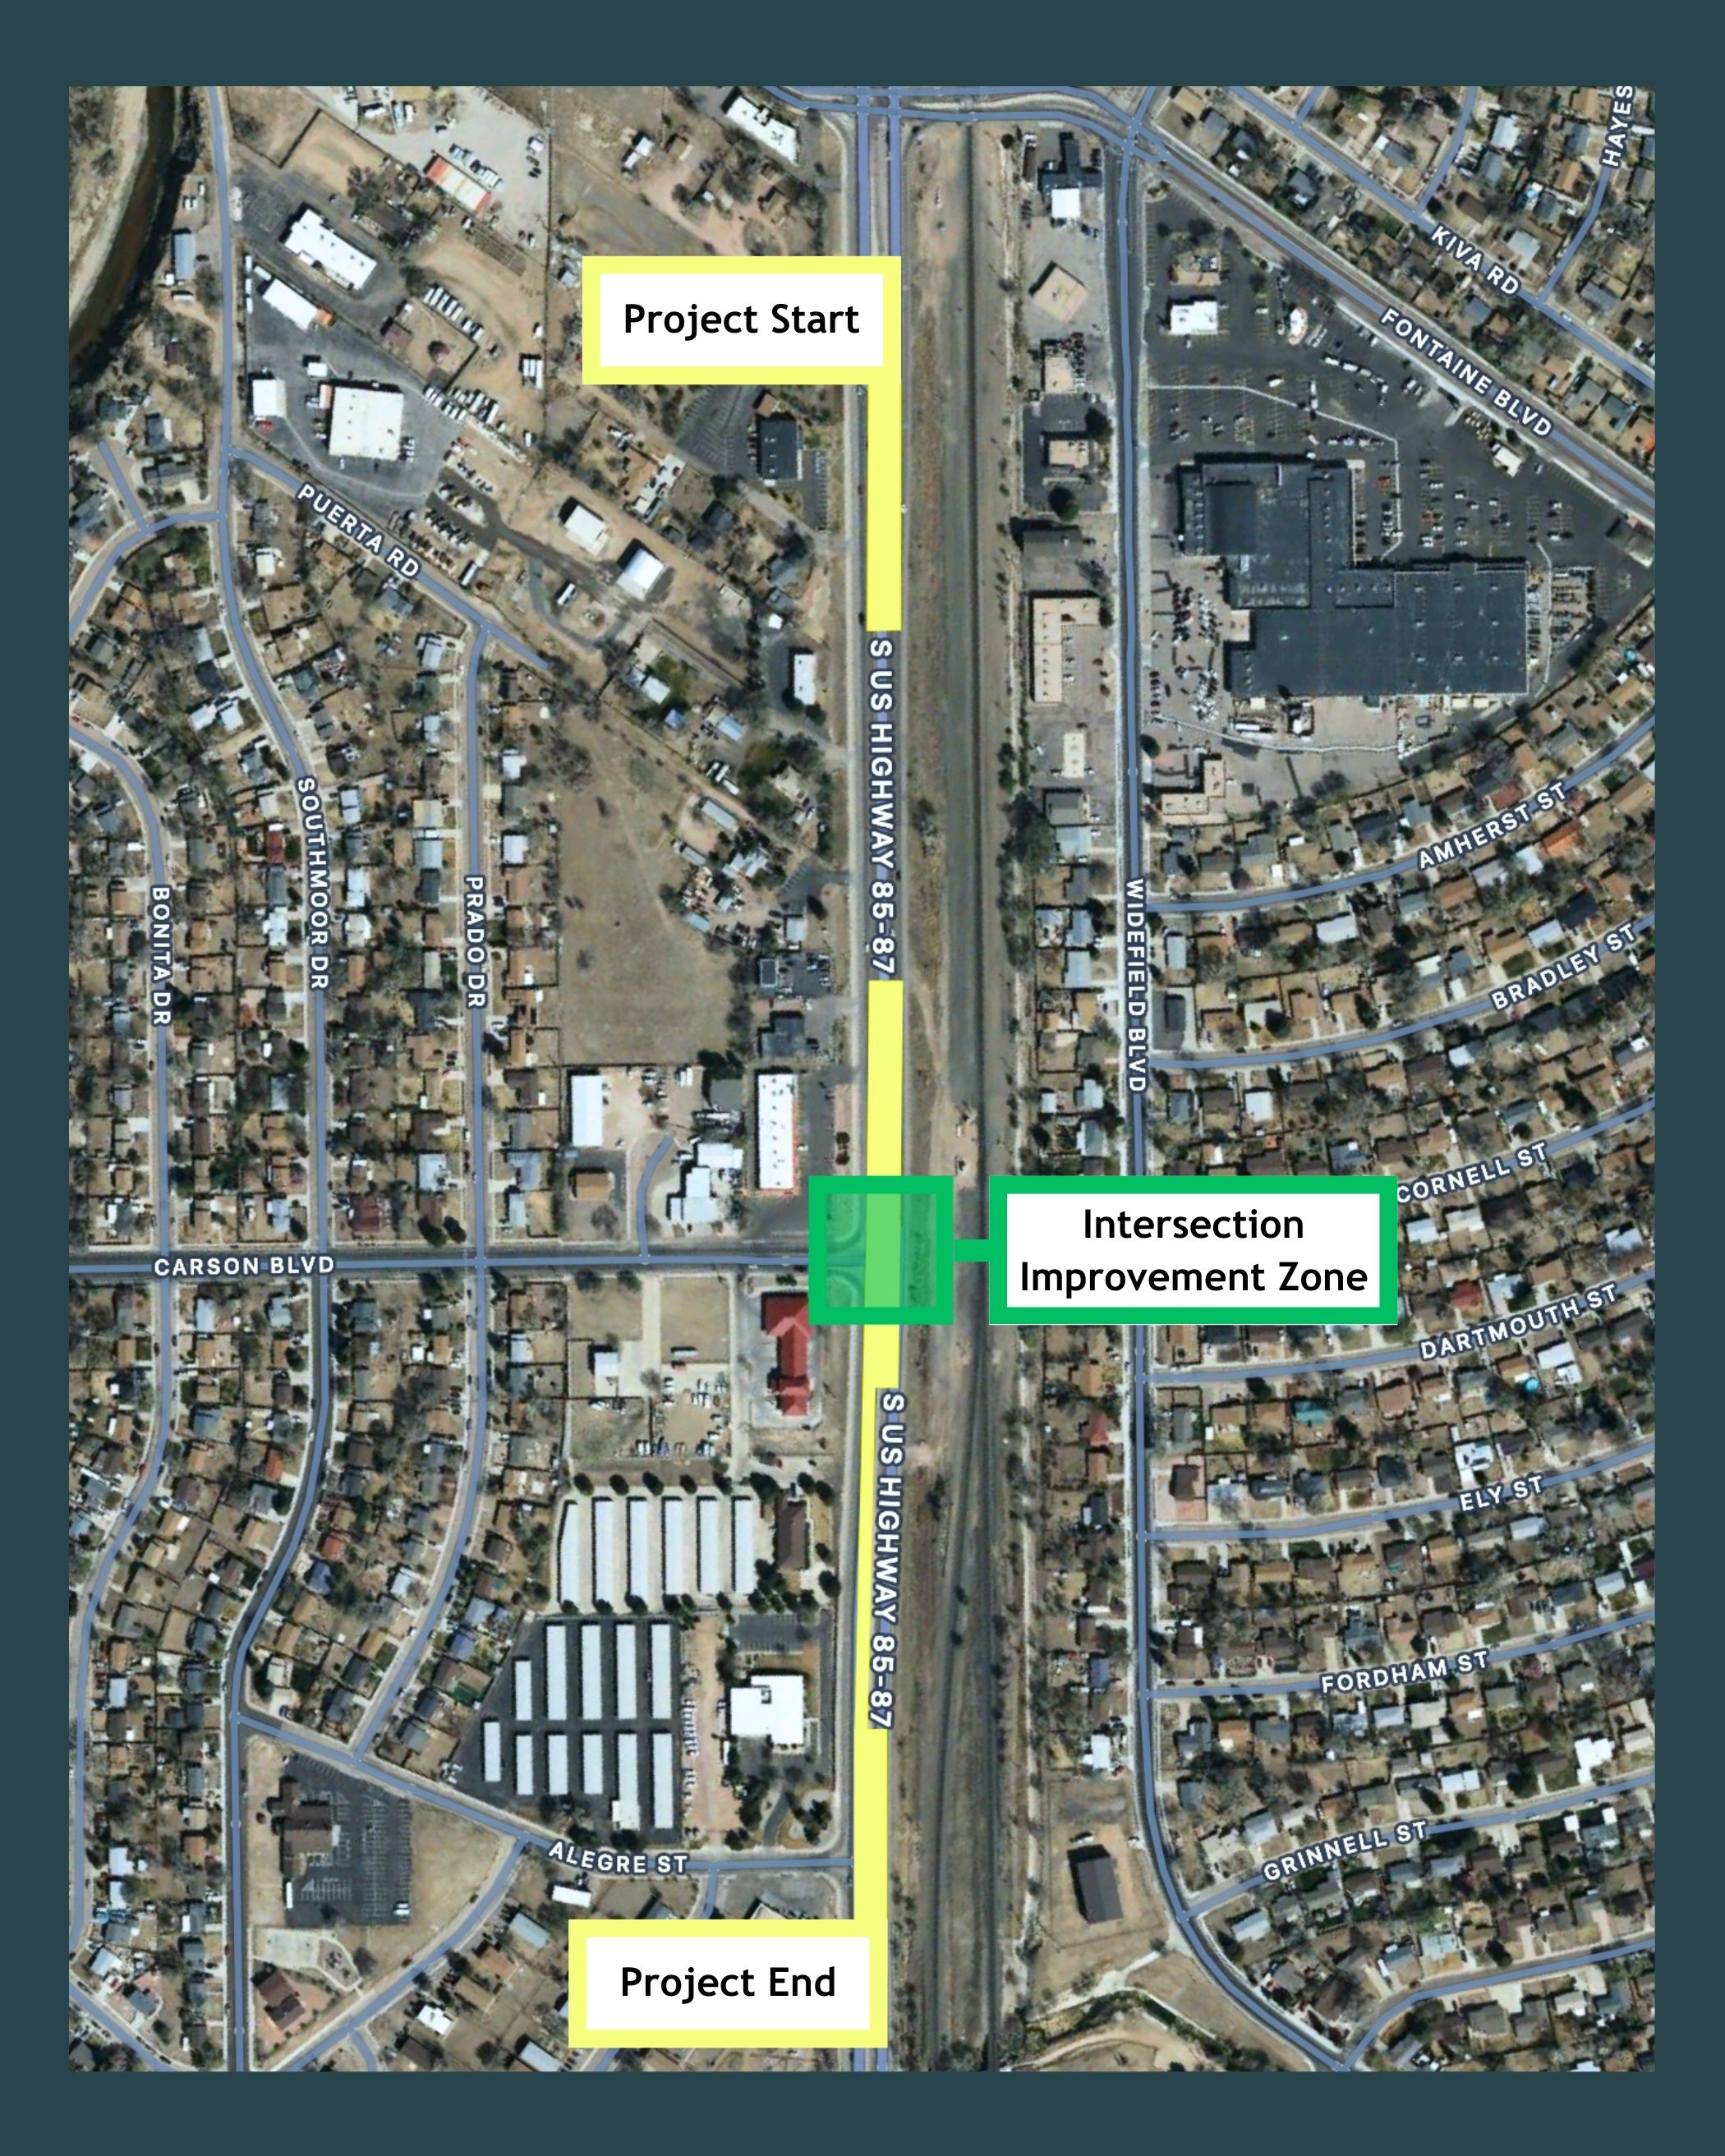 US85_Carson_Boulevard_Project_Map.jpg detail image